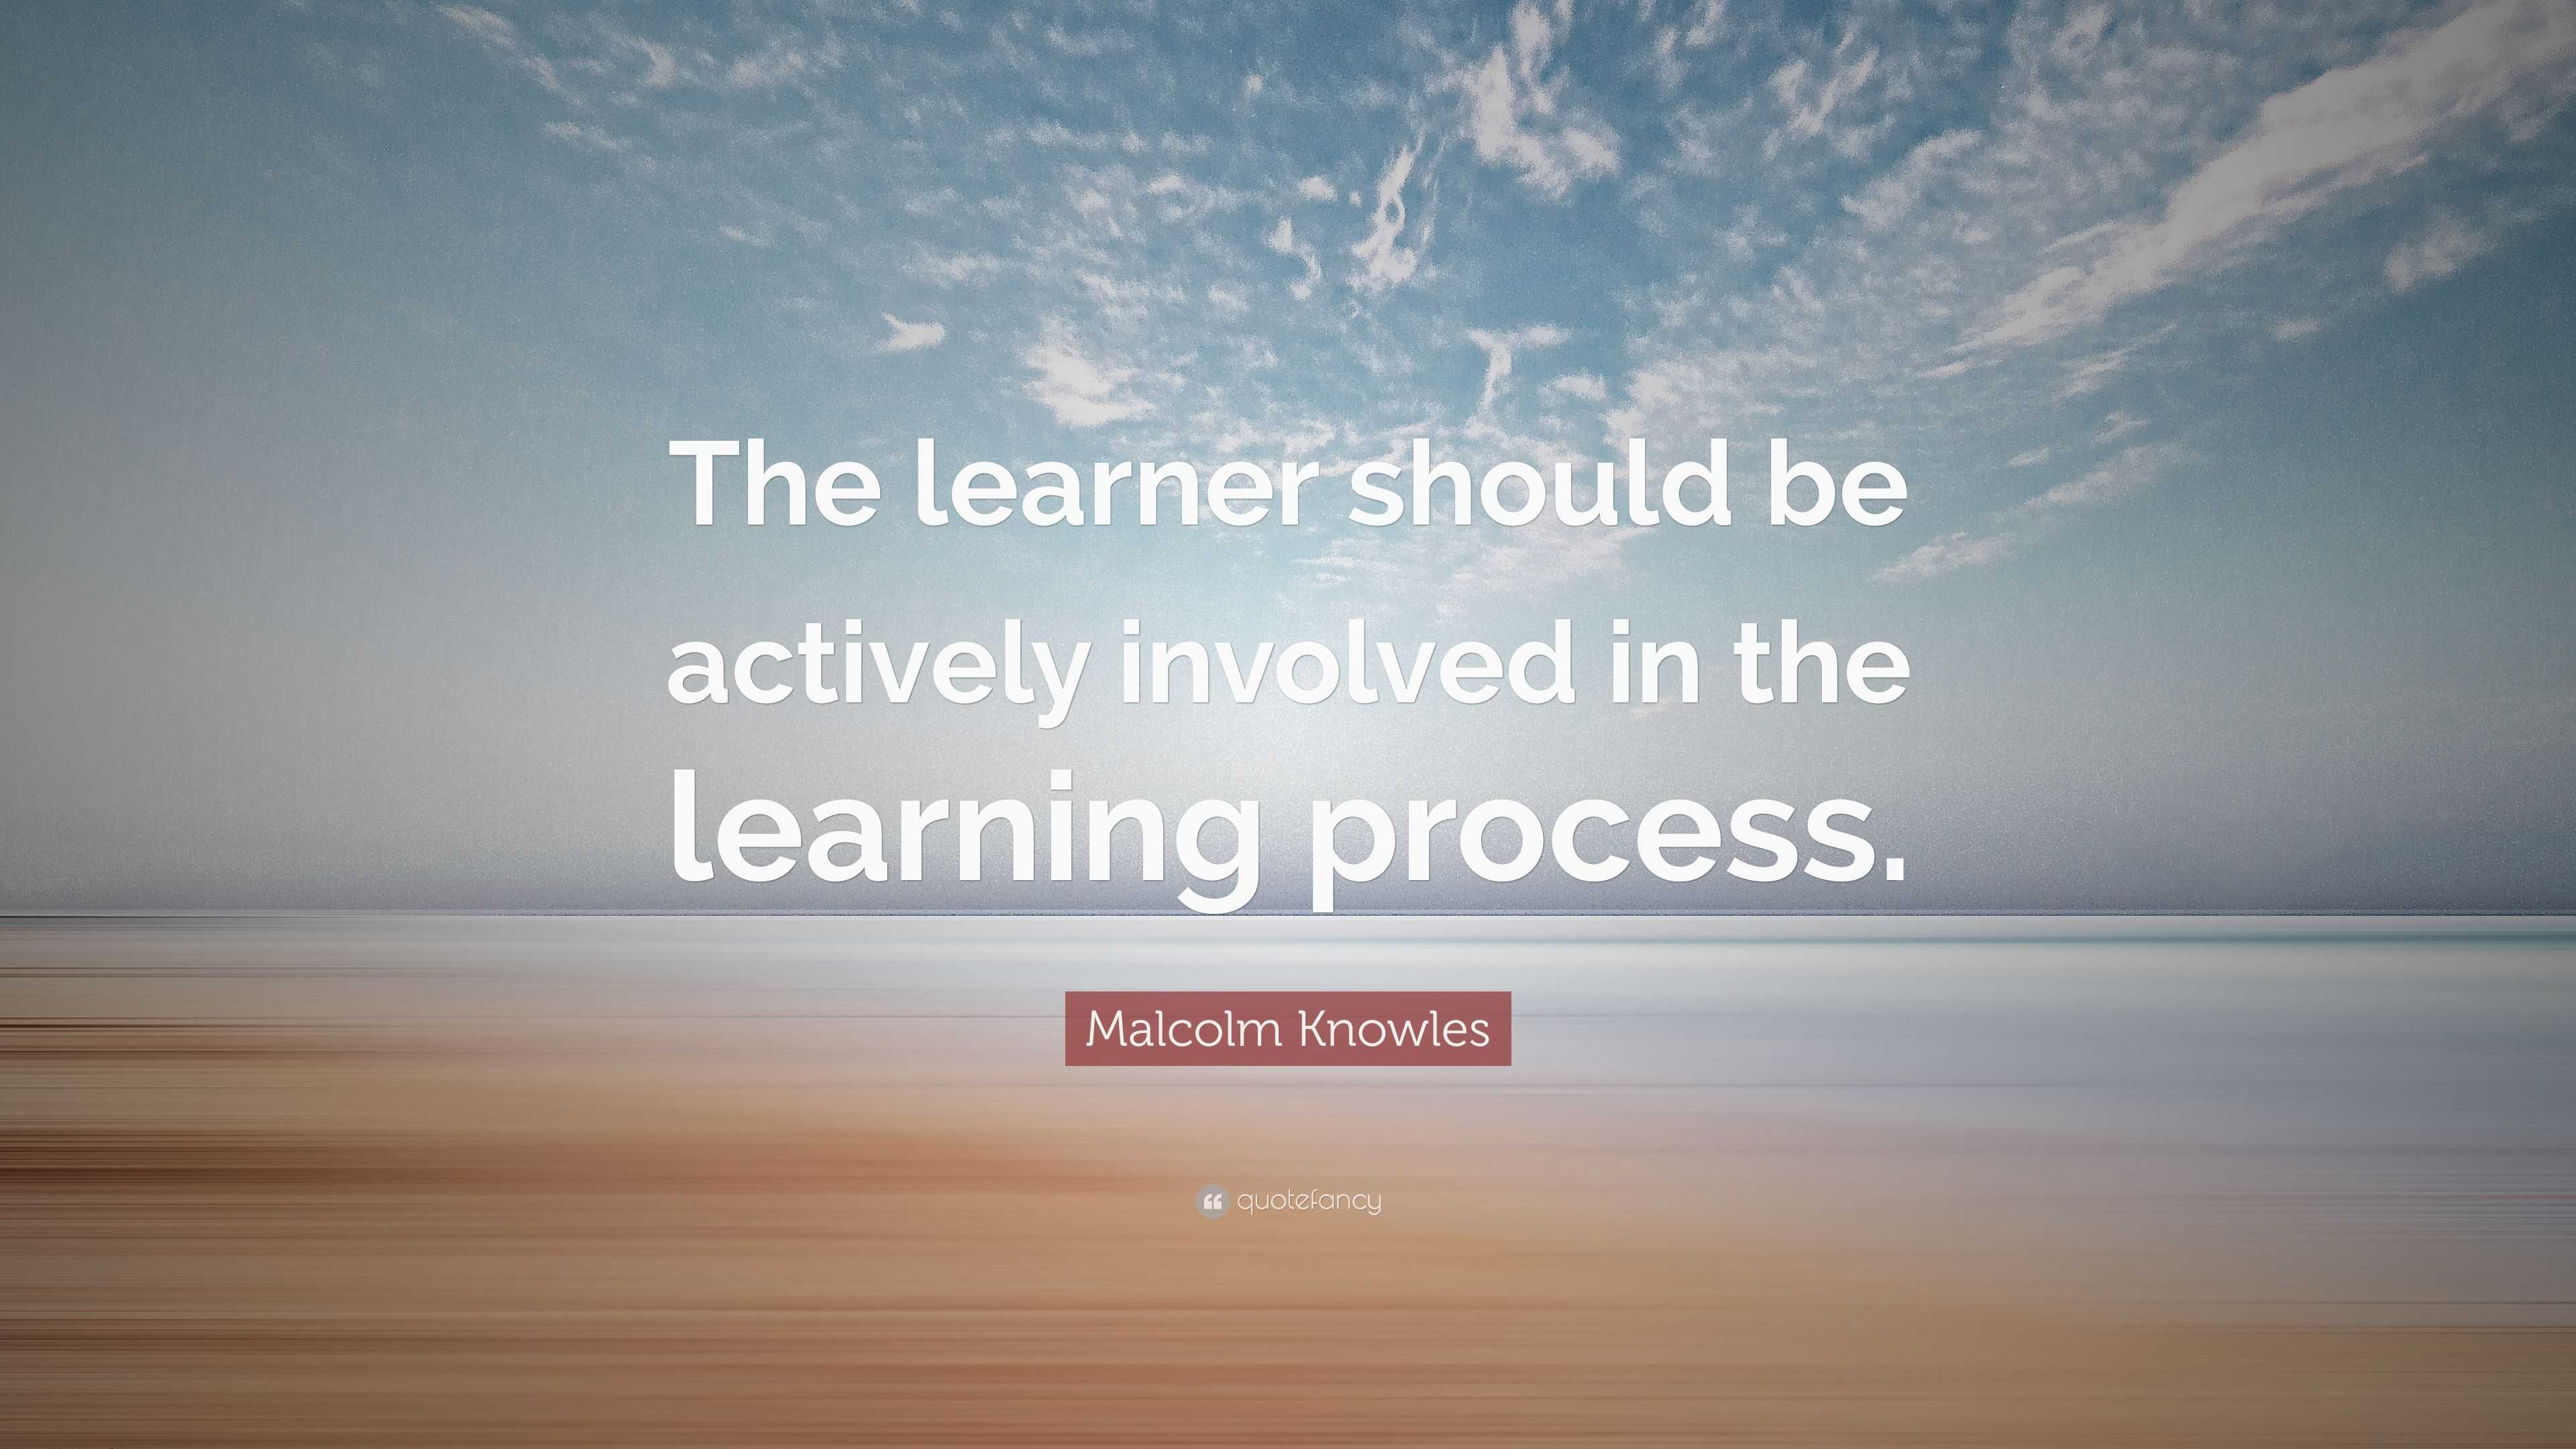 Malcolm Knowles Quote: “The learner should be actively involved in the